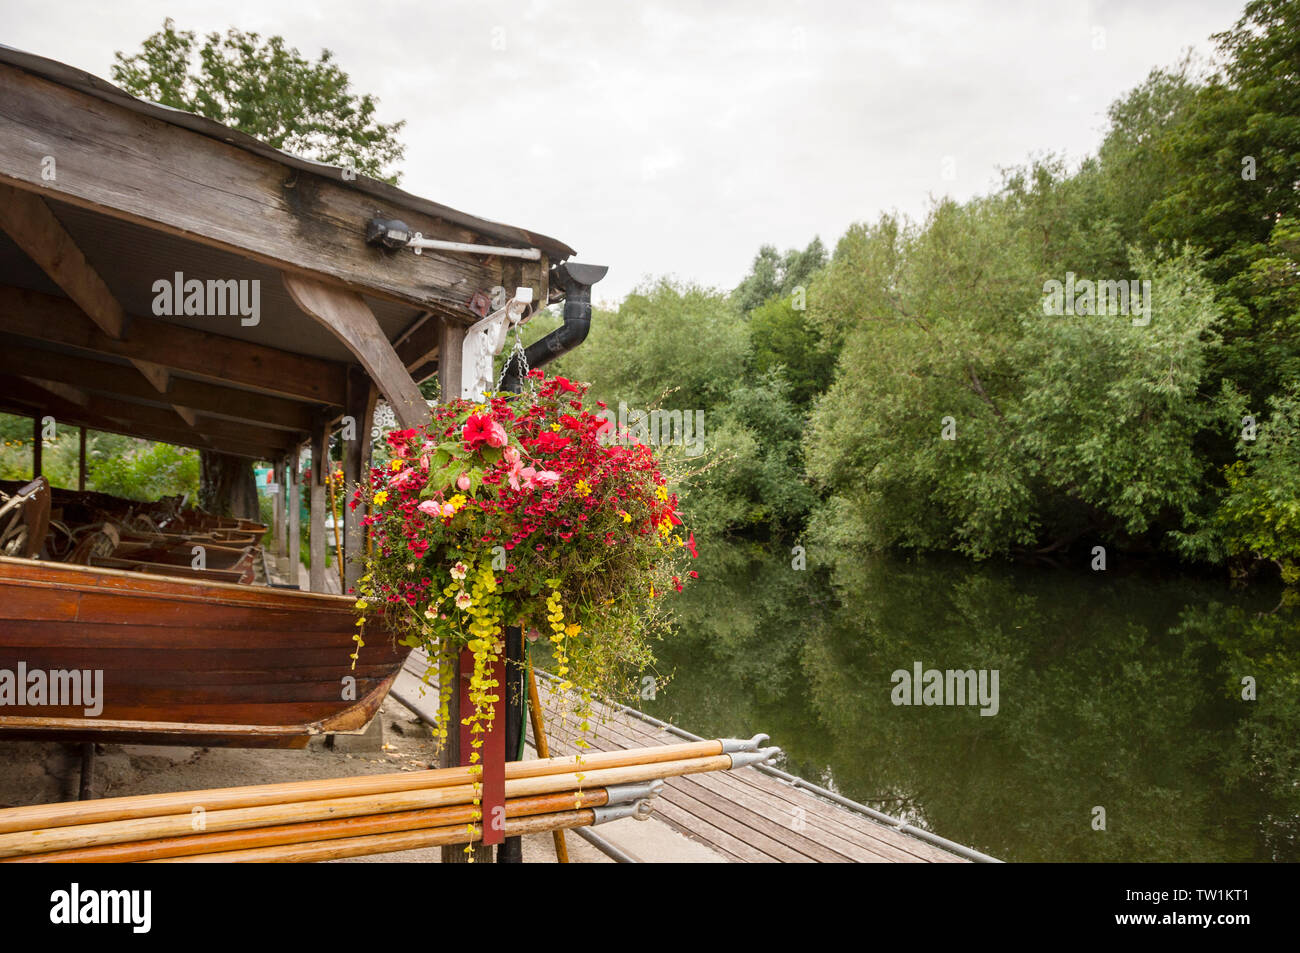 Wooden boat house, wood boats and quant poles along a particularly  picturesque setting on the River Avon in Bath, England. Stock Photo